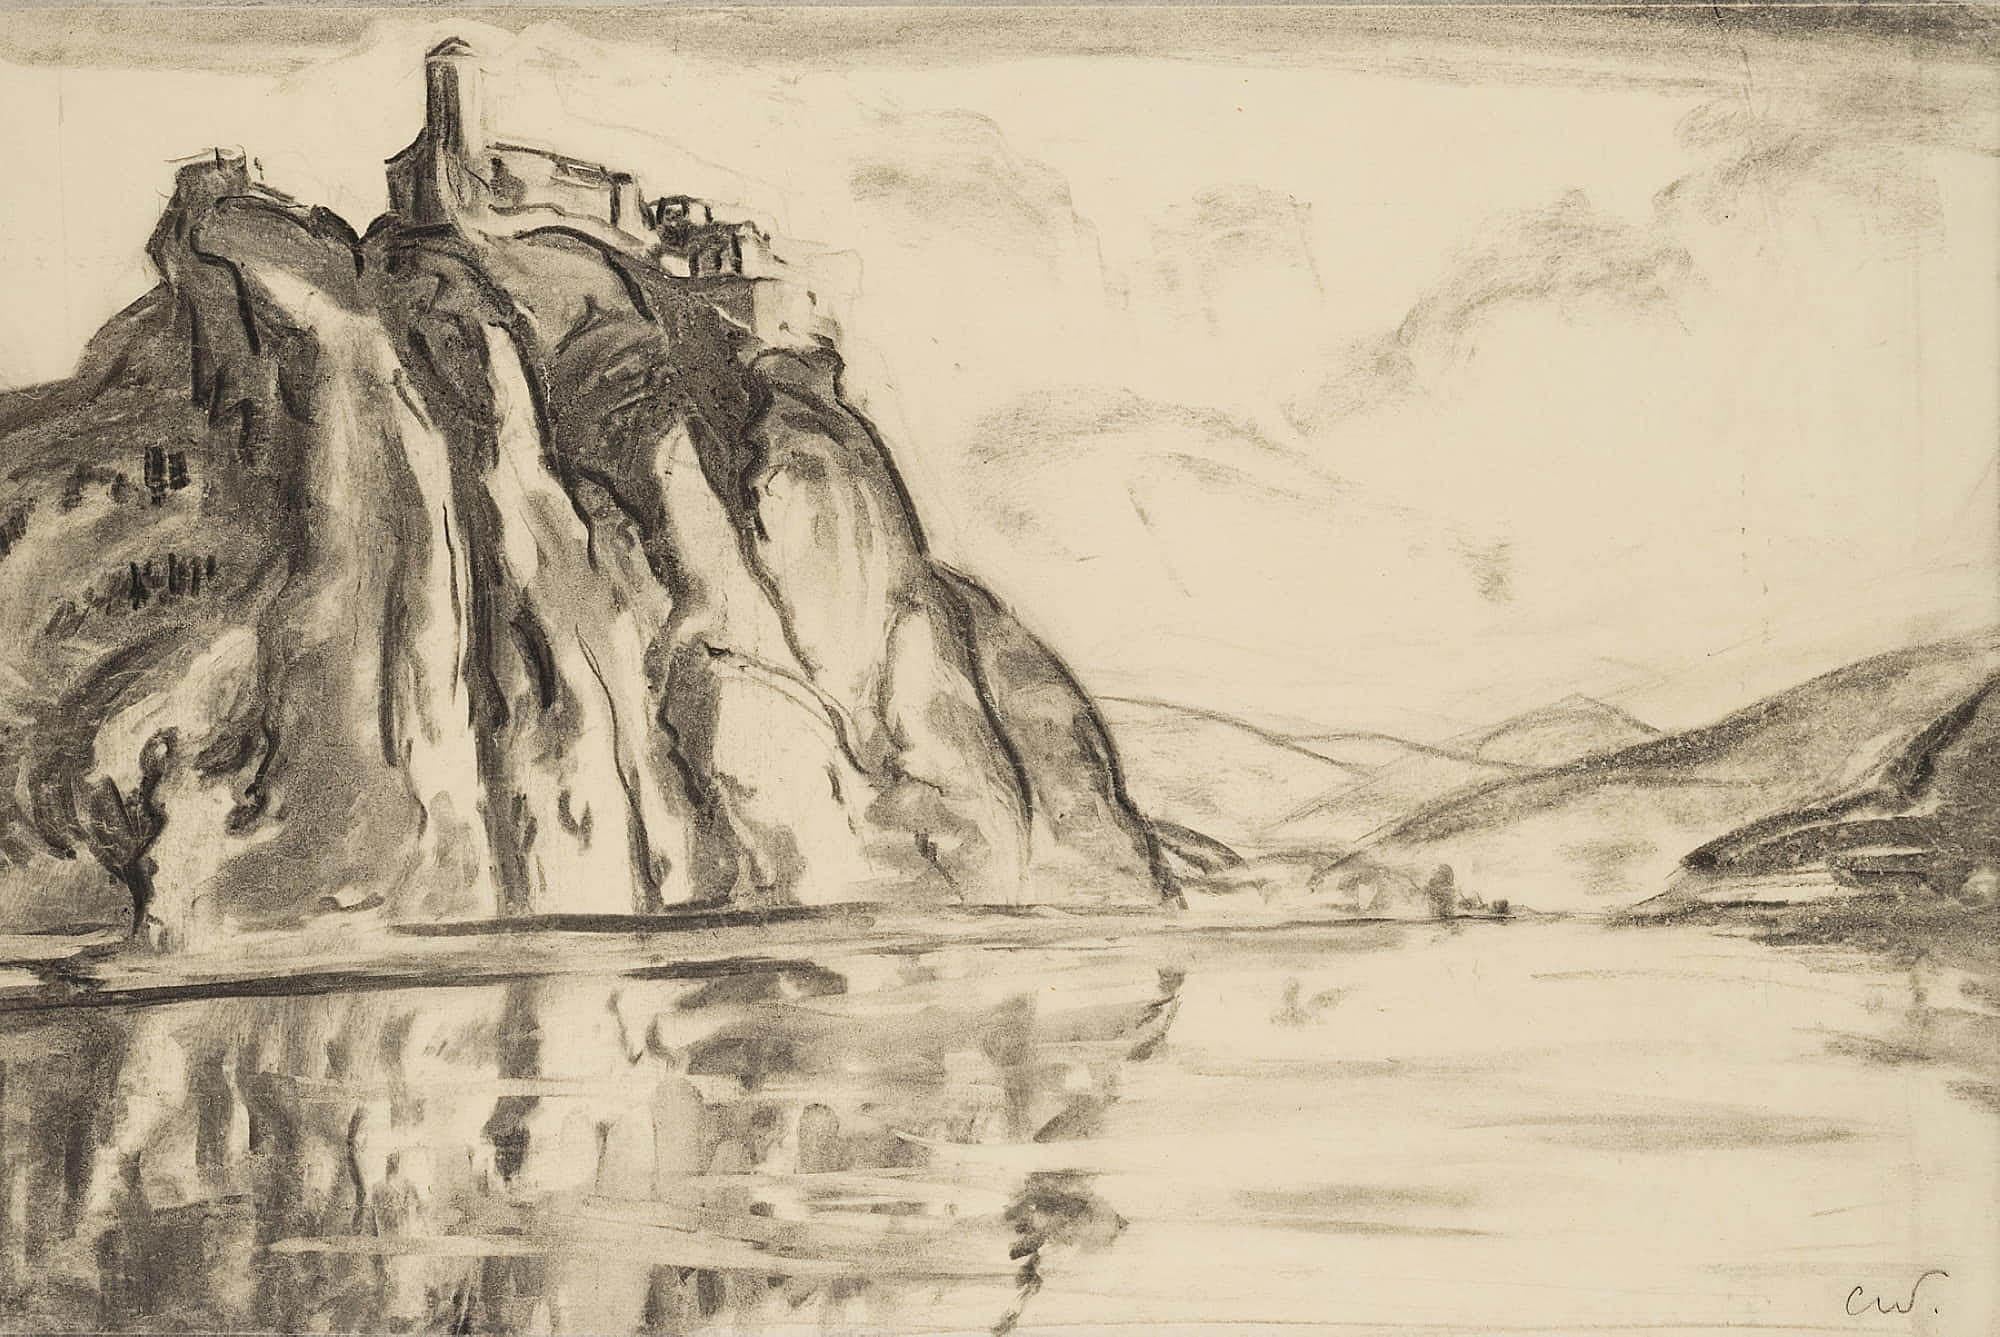 Carl August Walther (1880 Leipzig - 1956 Dresden): Schreckenstein Castle near Aussig on the Elbe in the Czech Republic, c. 1950, Charcoal

Technique: Charcoal on Transparent paper

Stamp: Lower left Estate stamp, Carl Walther. Dresden. 20th